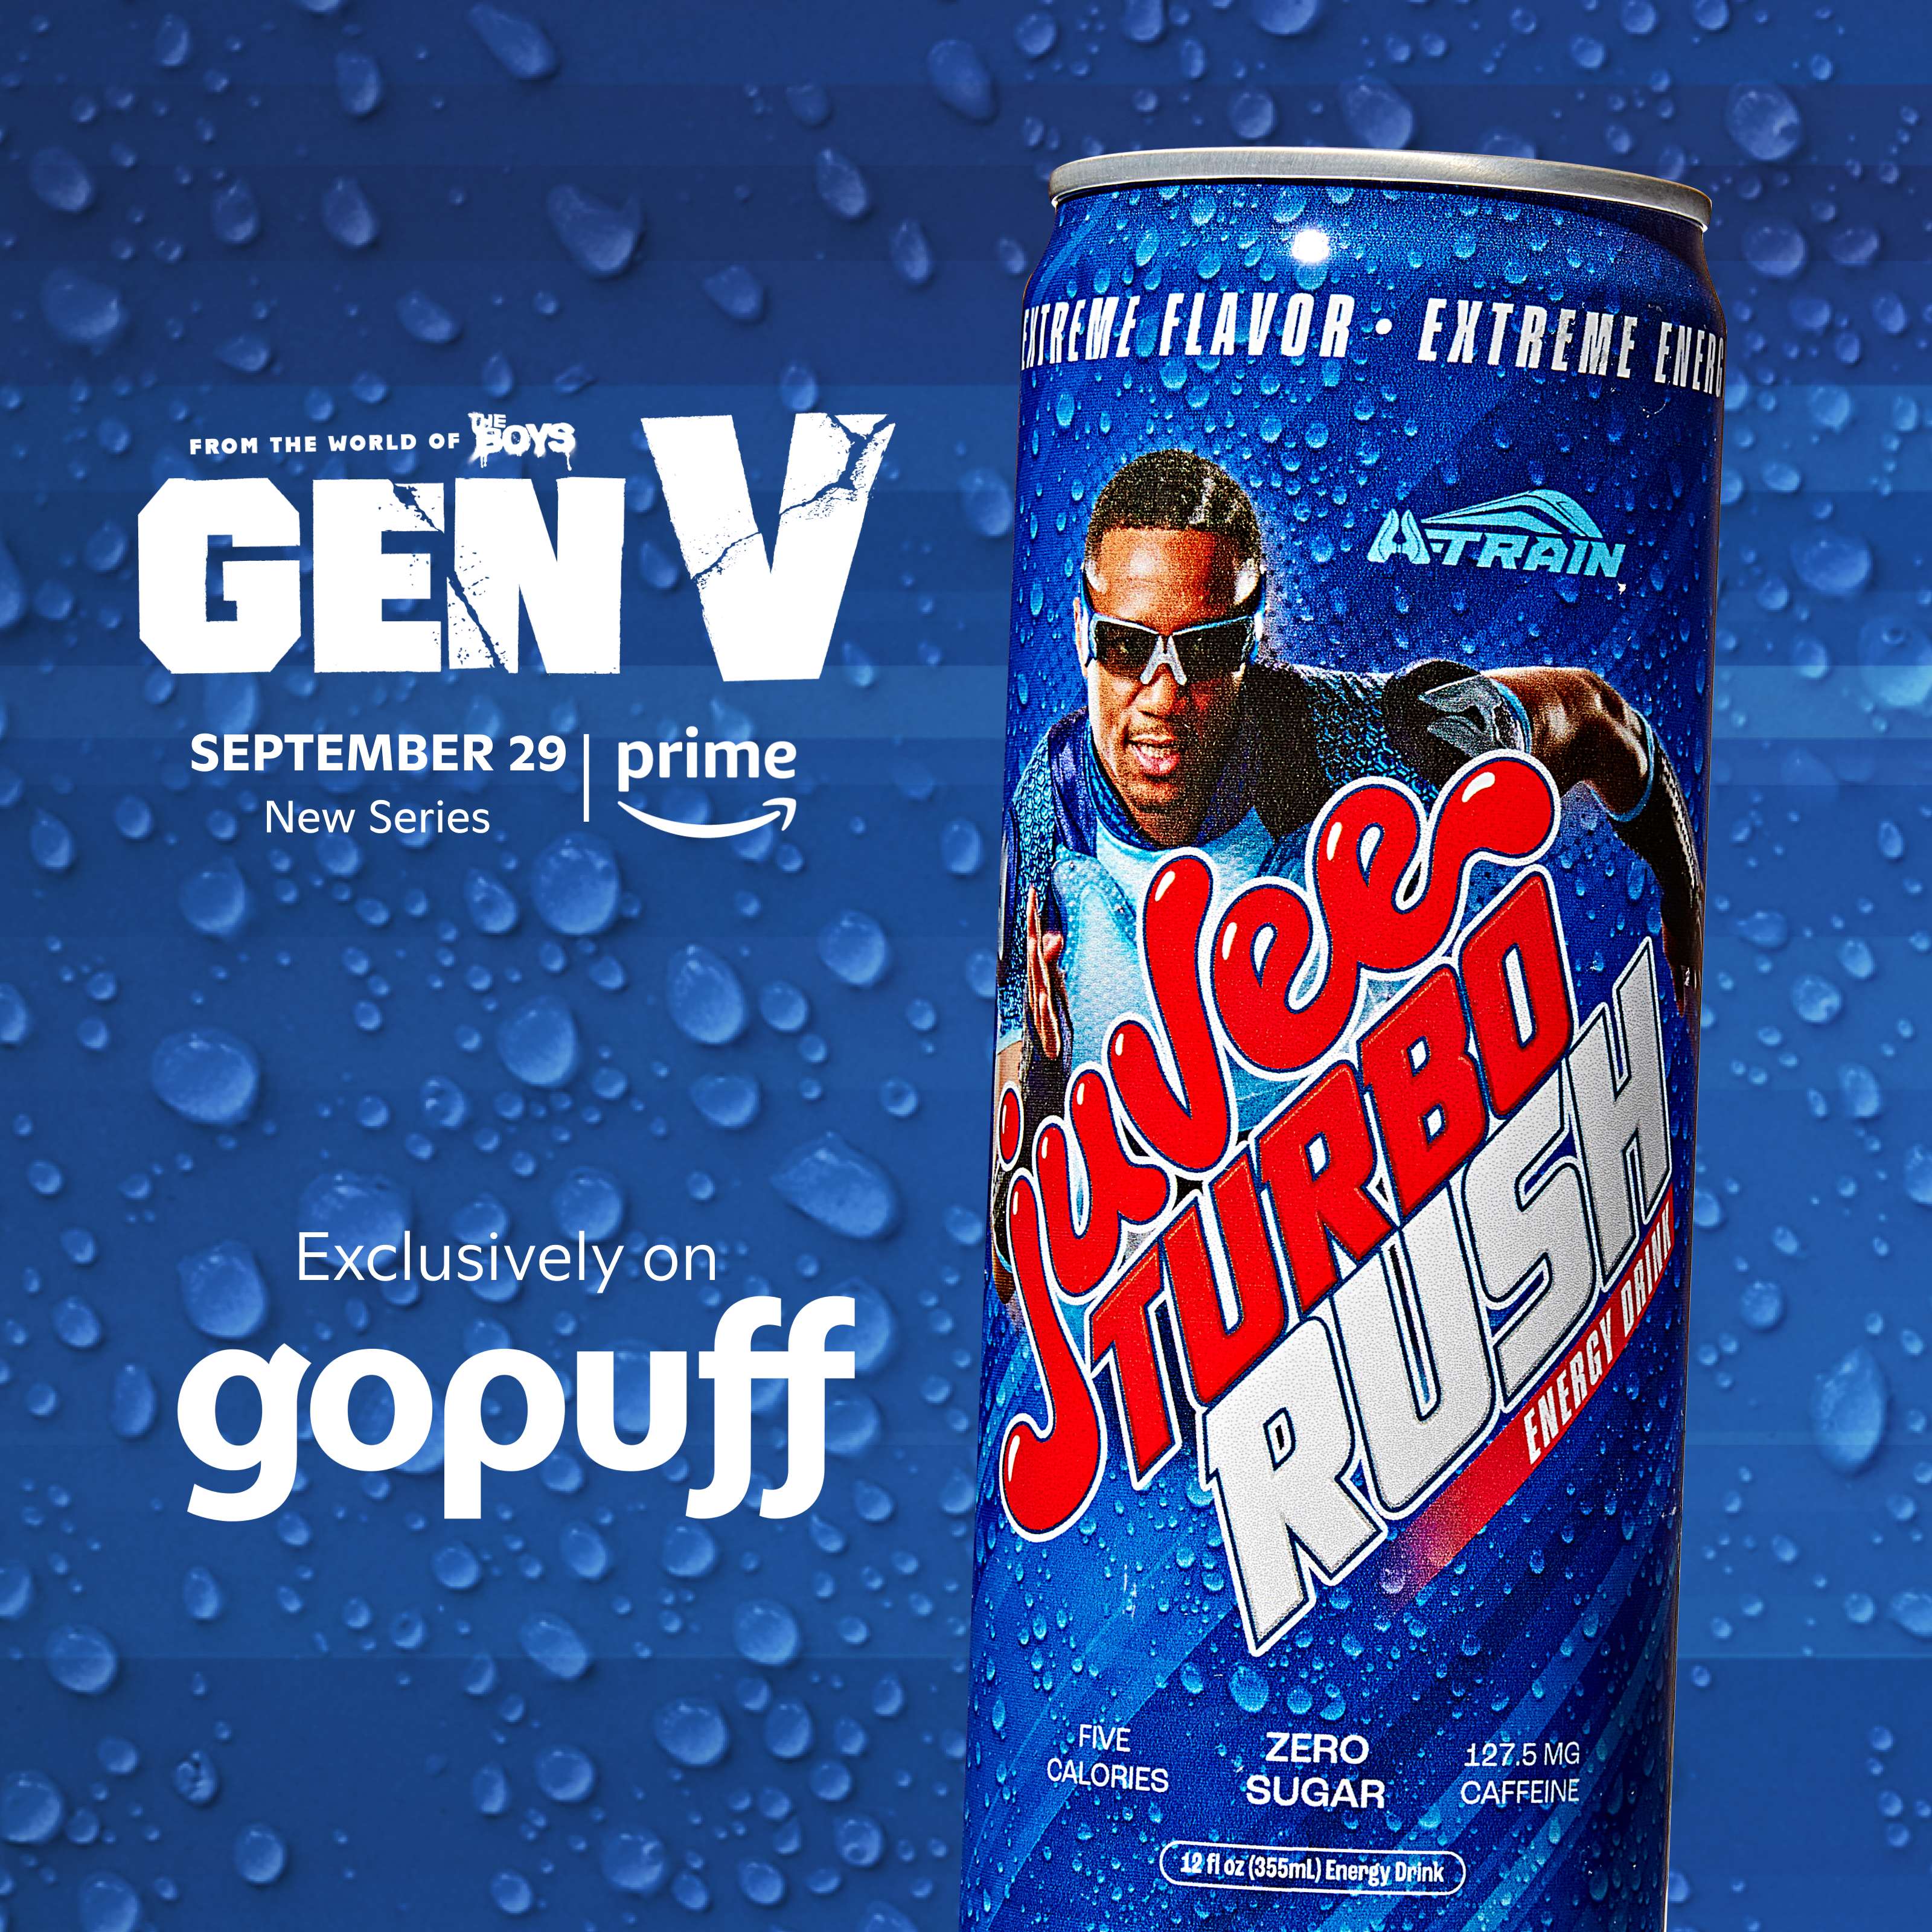 Gopuff and Juvee Create ‘Turbo Rush’ Energy Drink to Help Fans Celebrate The Gen V Premiere